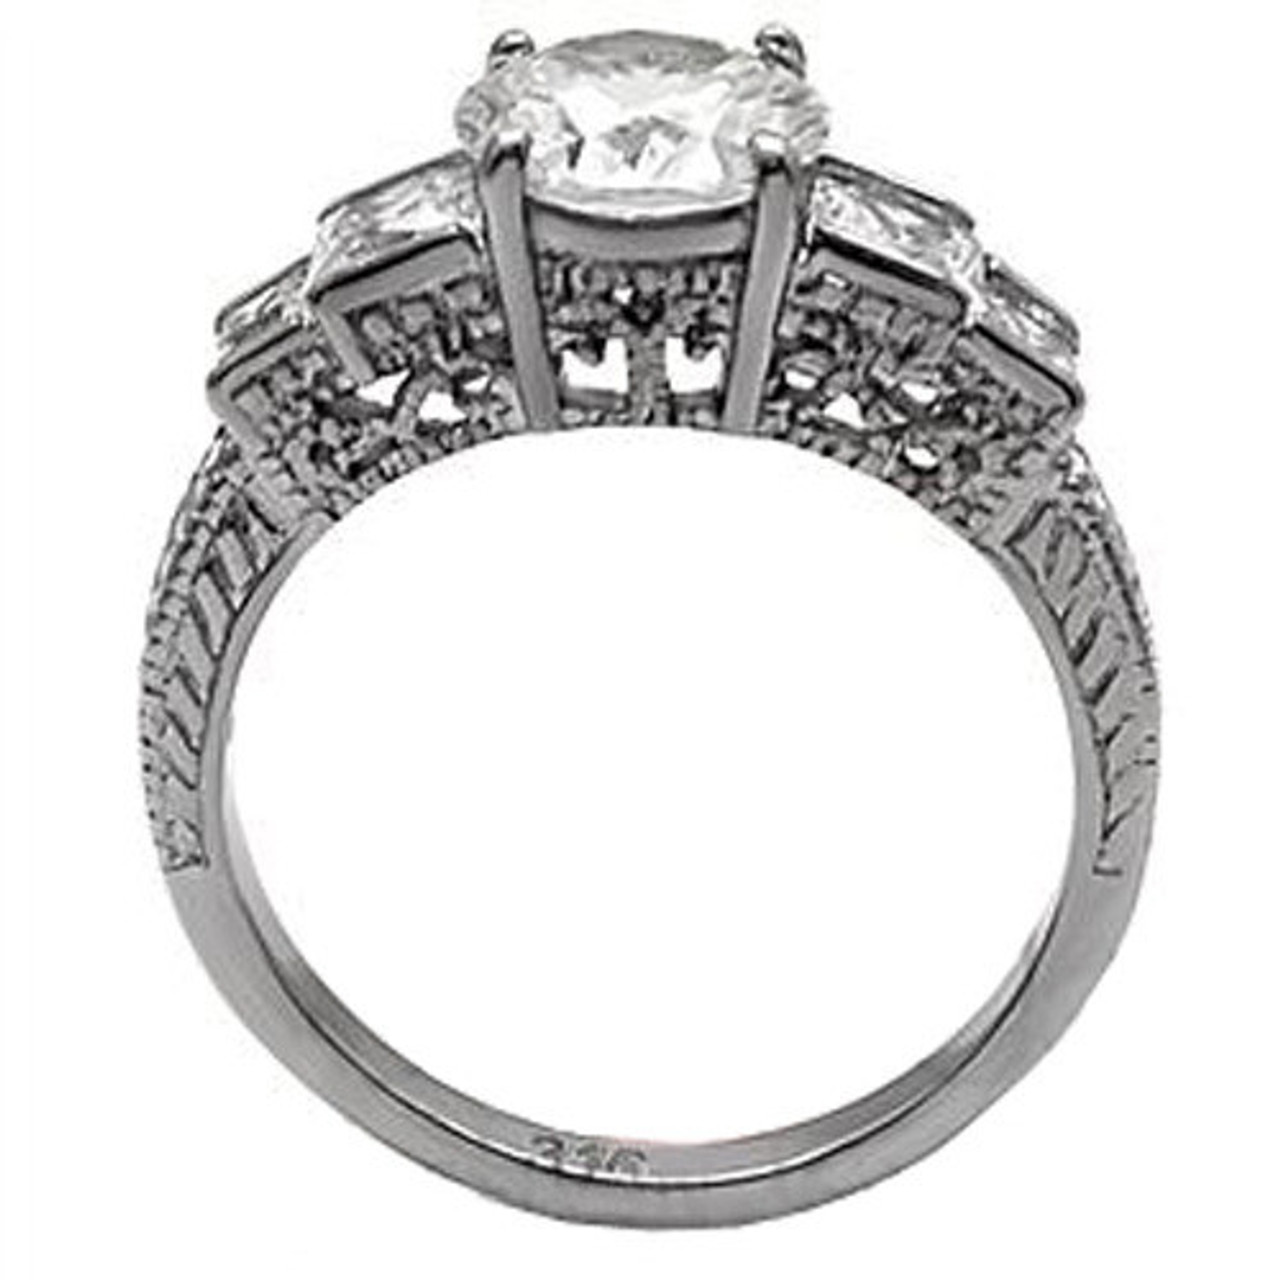 Emmas Classic 5 Stone Ring - Stainless Steel Engagement Ring / Wedding Band for Women